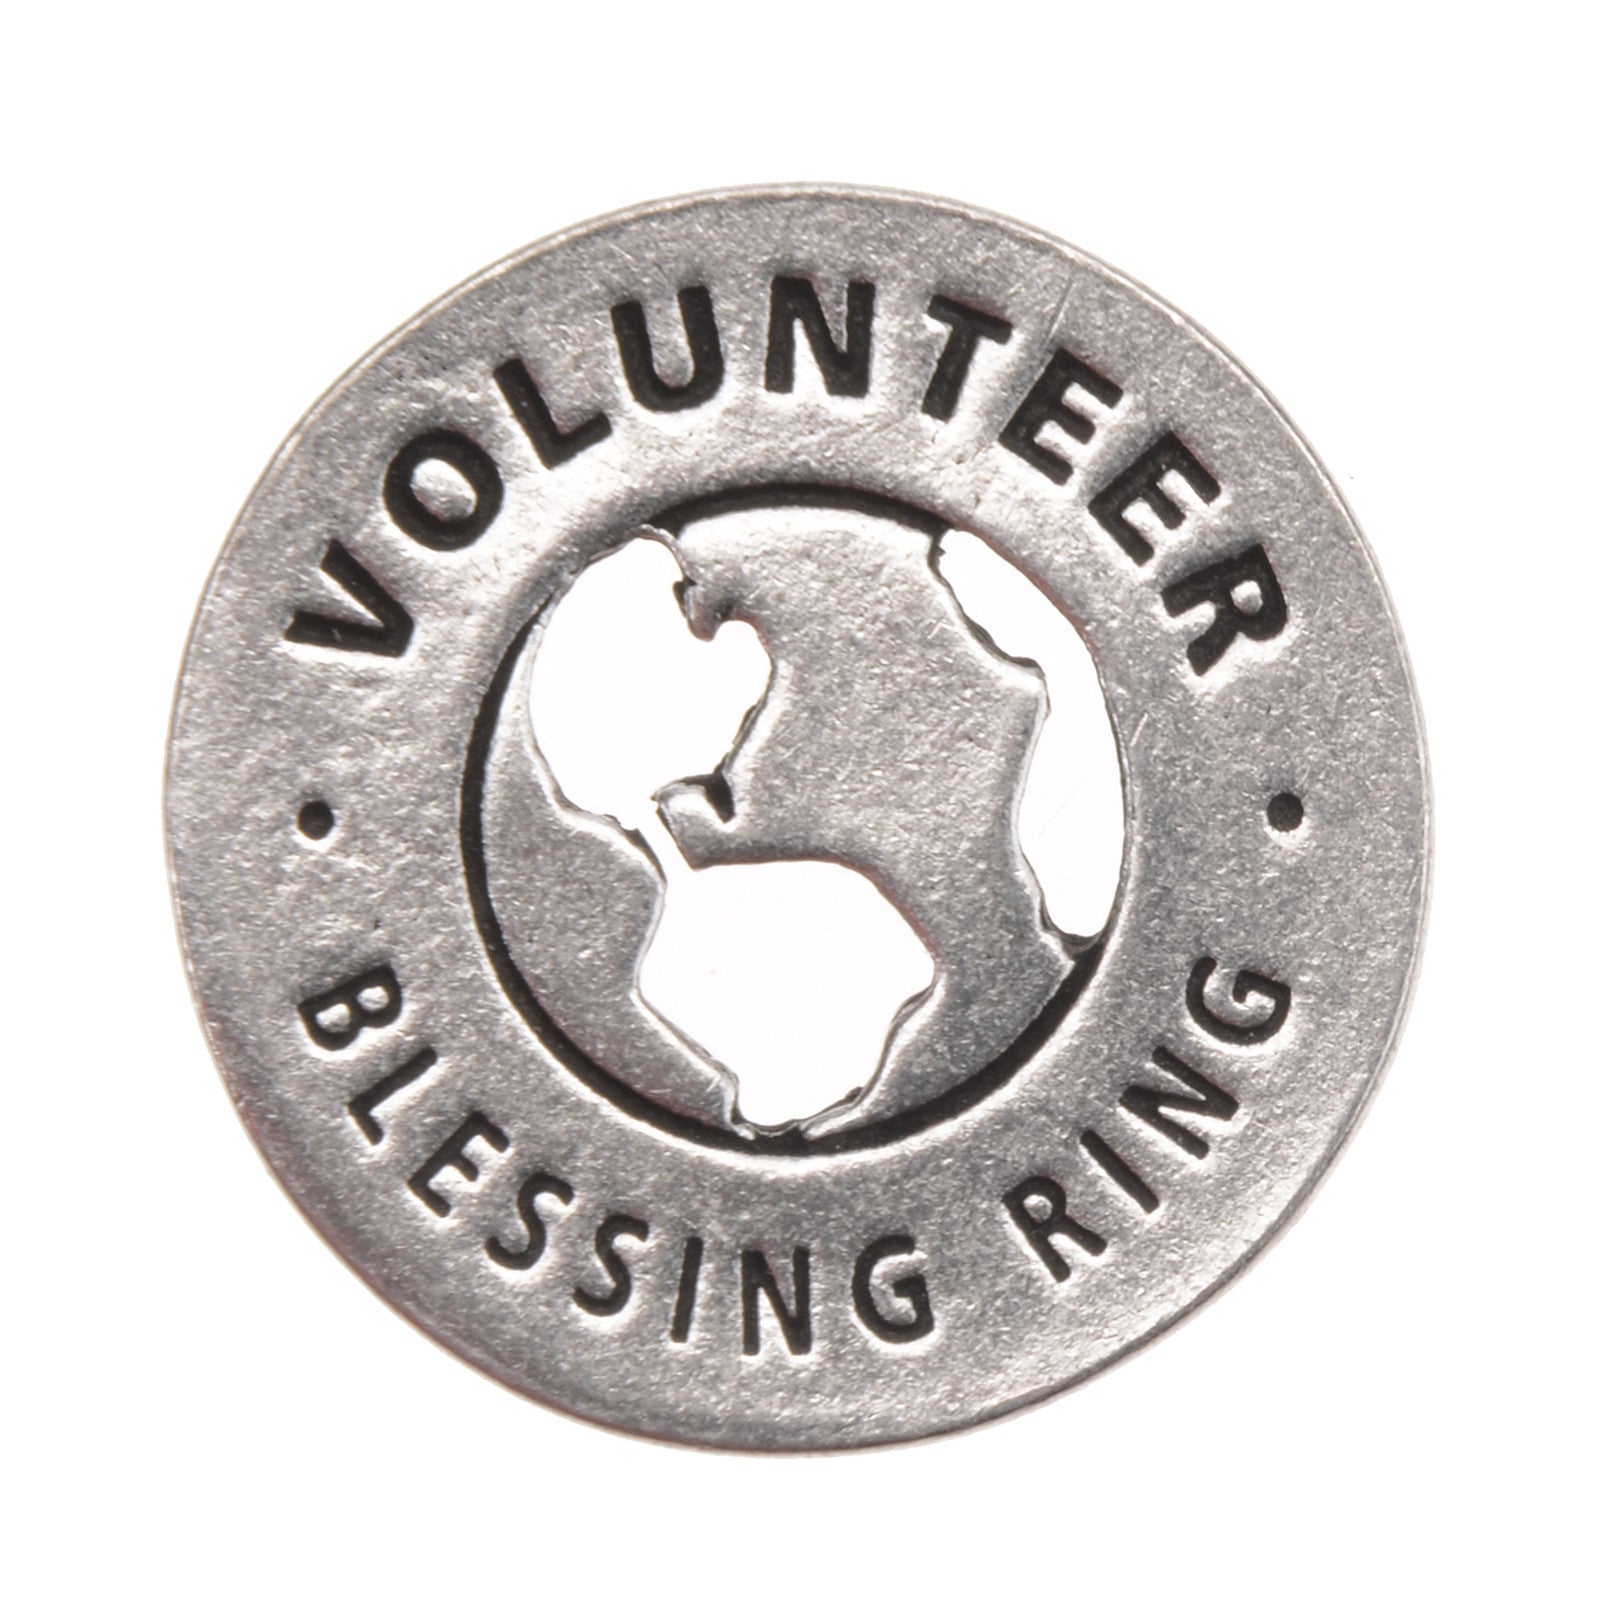 Volunteer Blessing Ring front (on back - volunteers make the world a better place)